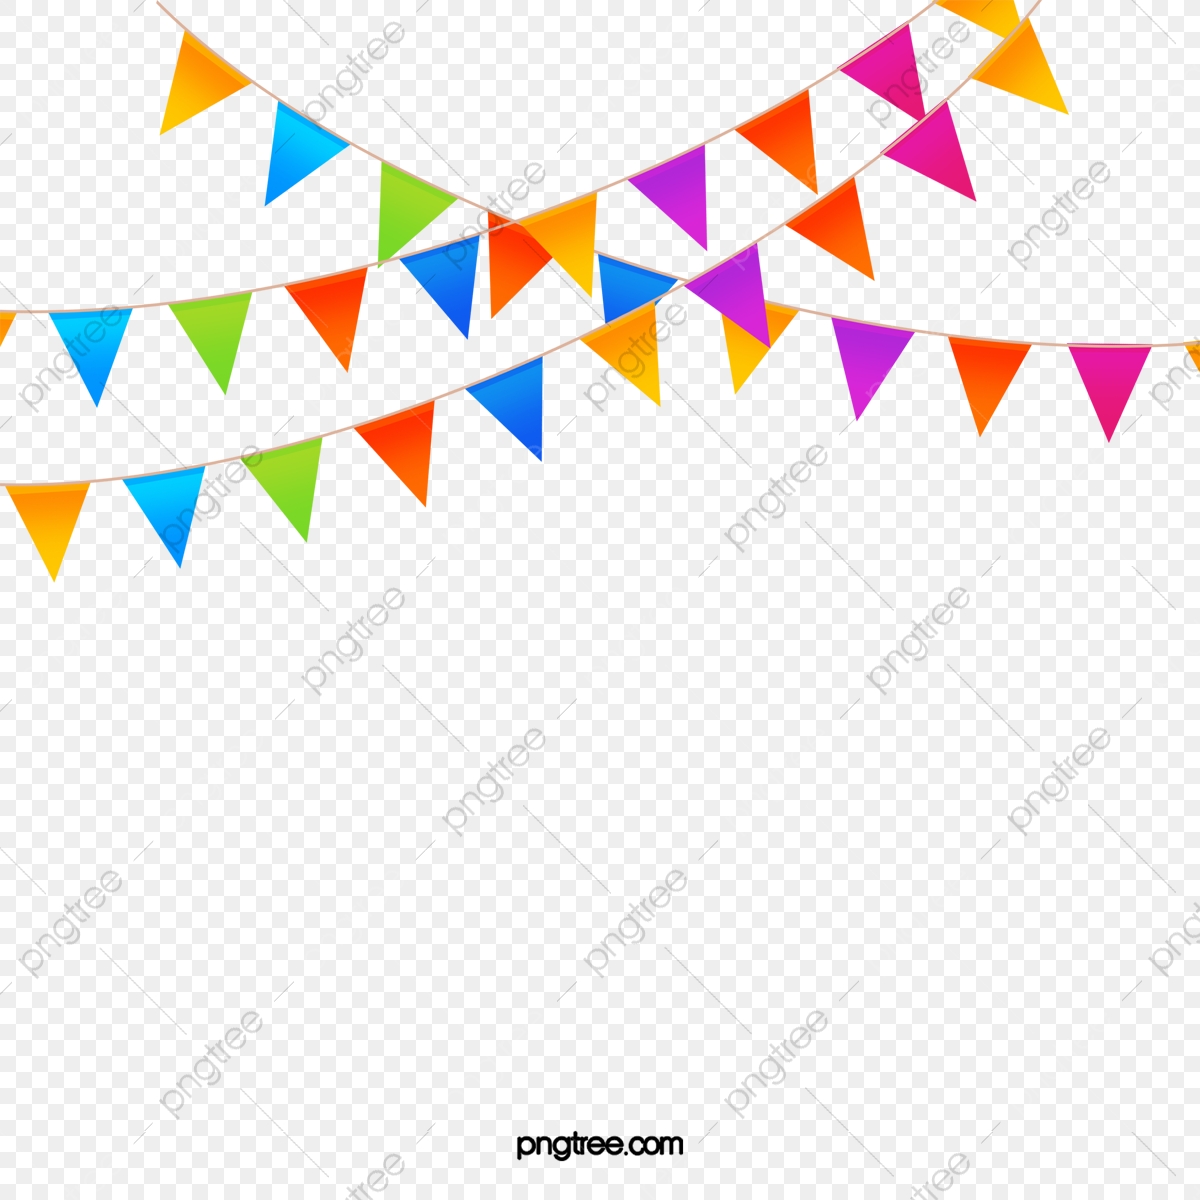 Bunting, Pennant, Banner PNG Transparent Clipart Image and.